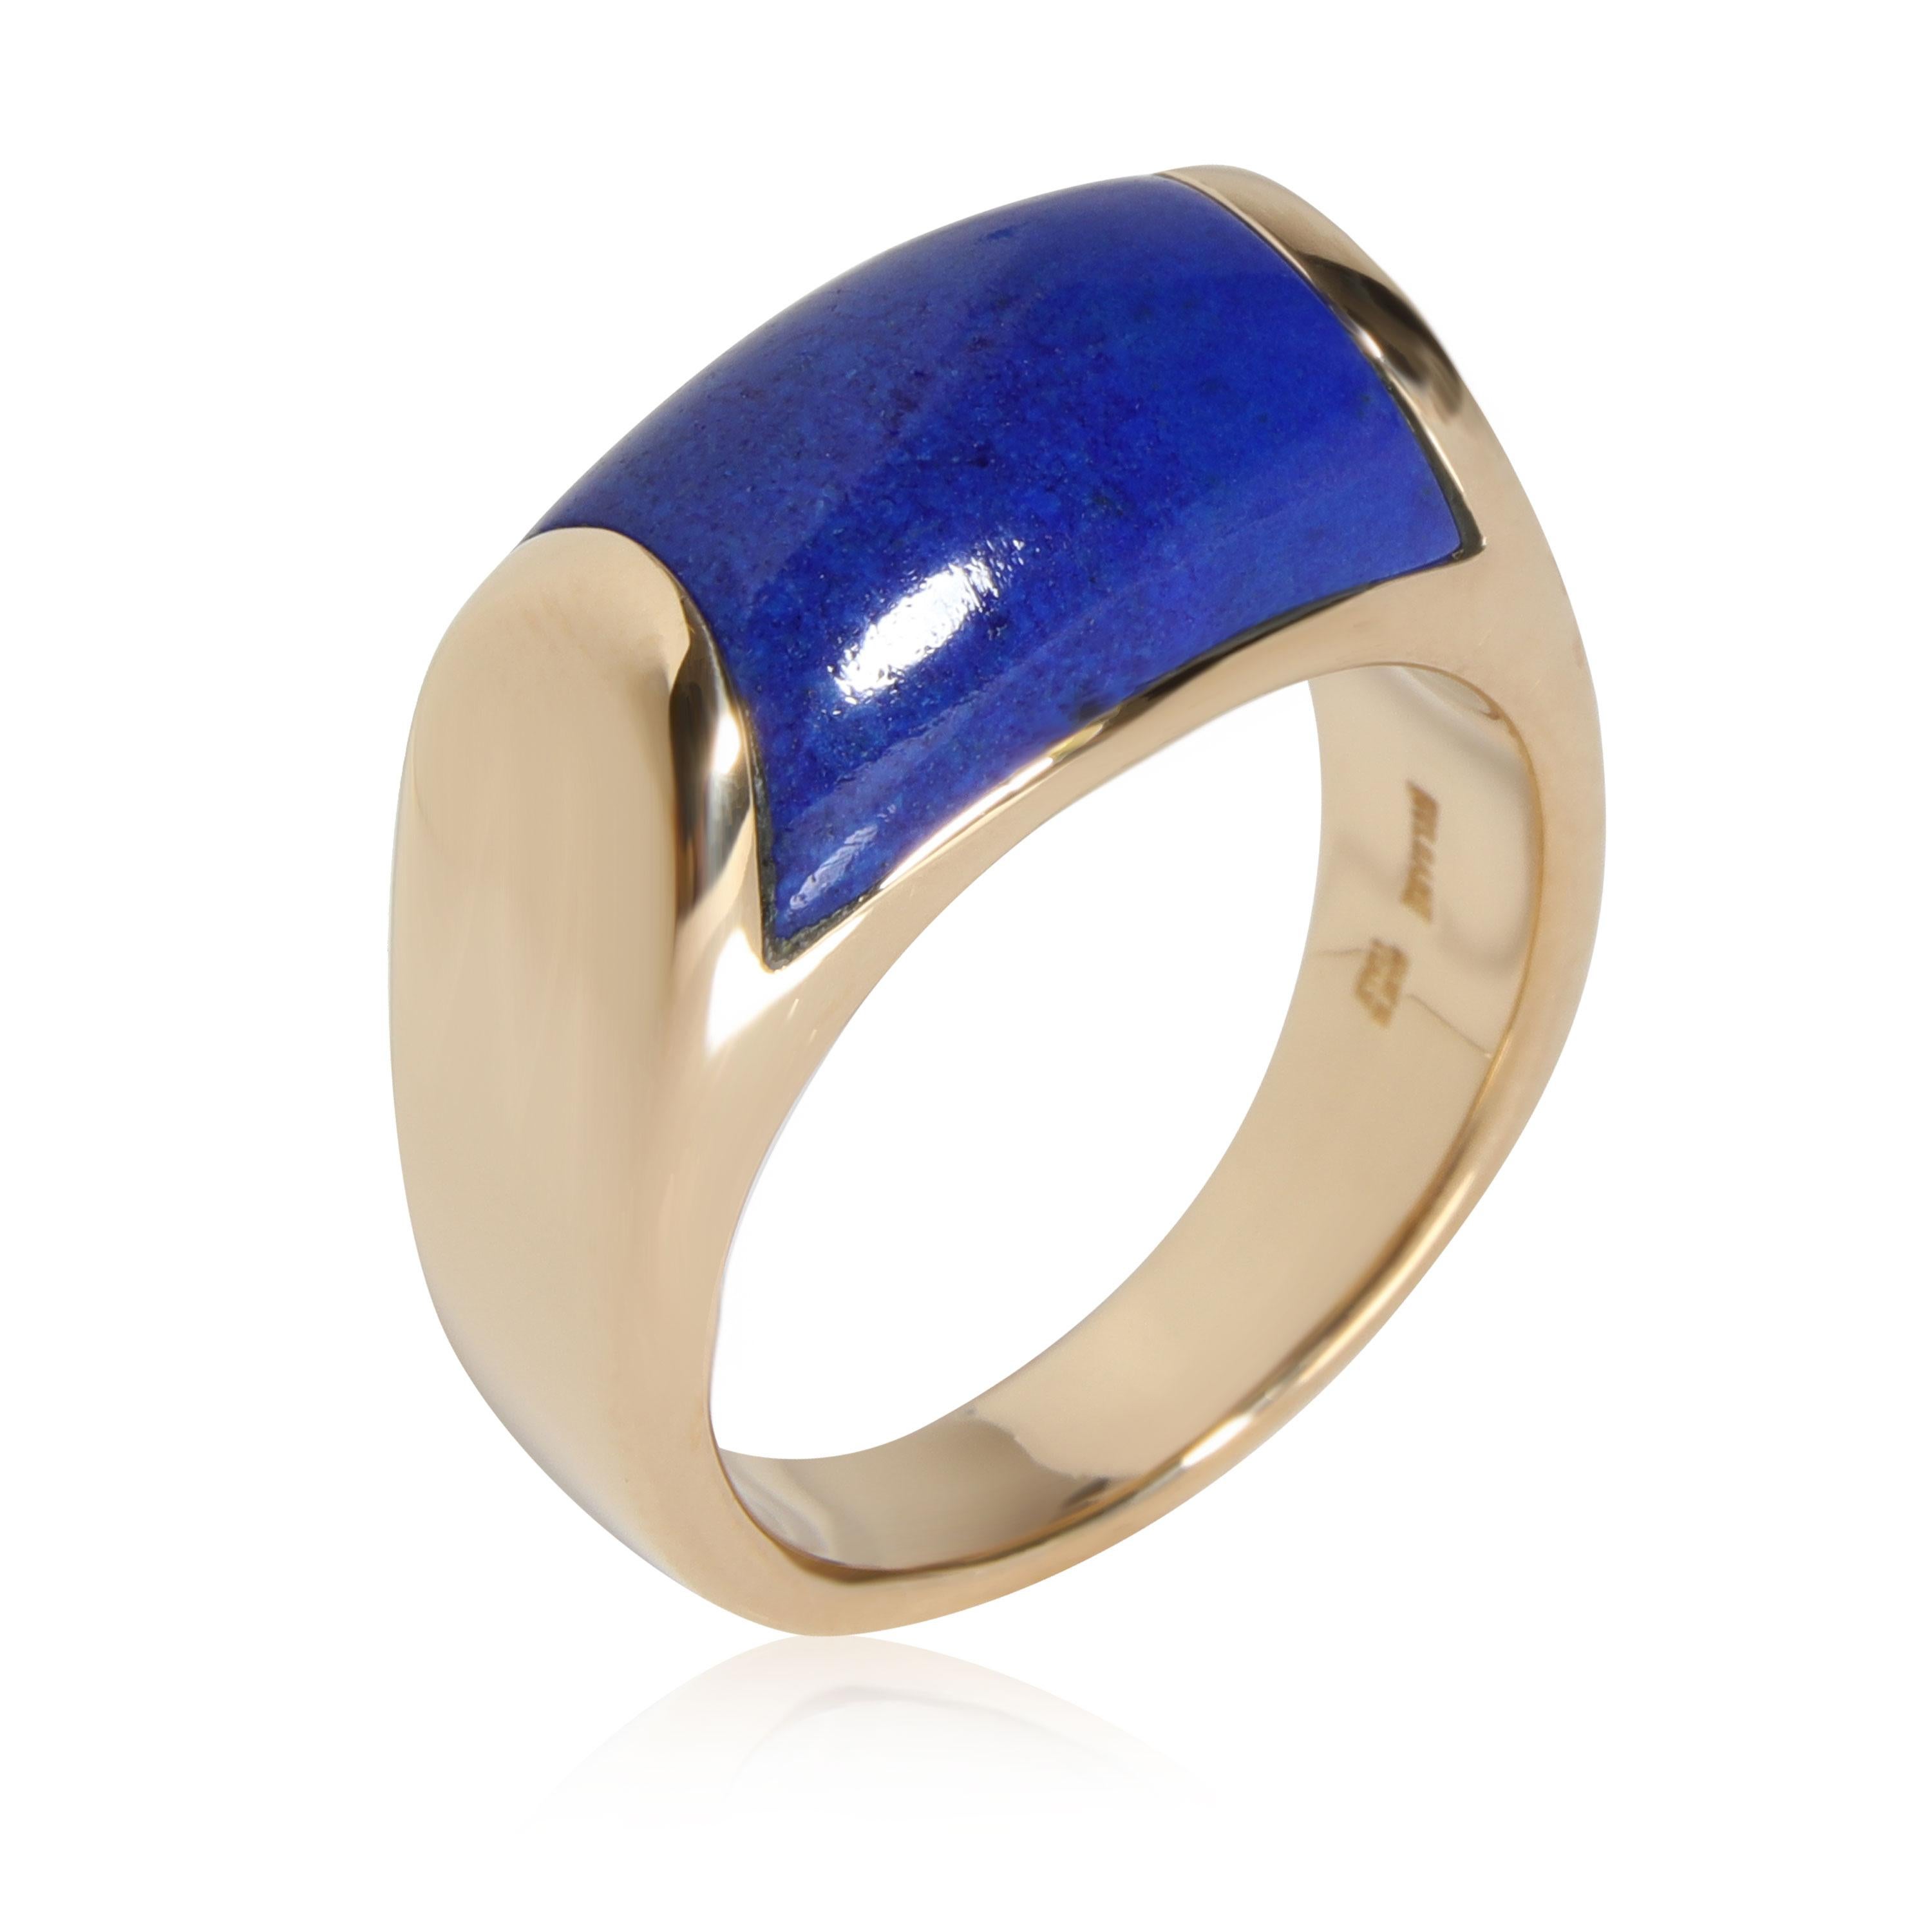 
Bulgari Tronchetto Lapis Ring in 18K Yellow Gold

PRIMARY DETAILS
SKU: 112136
Listing Title: Bulgari Tronchetto Lapis Ring in 18K Yellow Gold
Condition Description: Retails for 3,000 USD. In excellent condition and recently polished. Ring size is